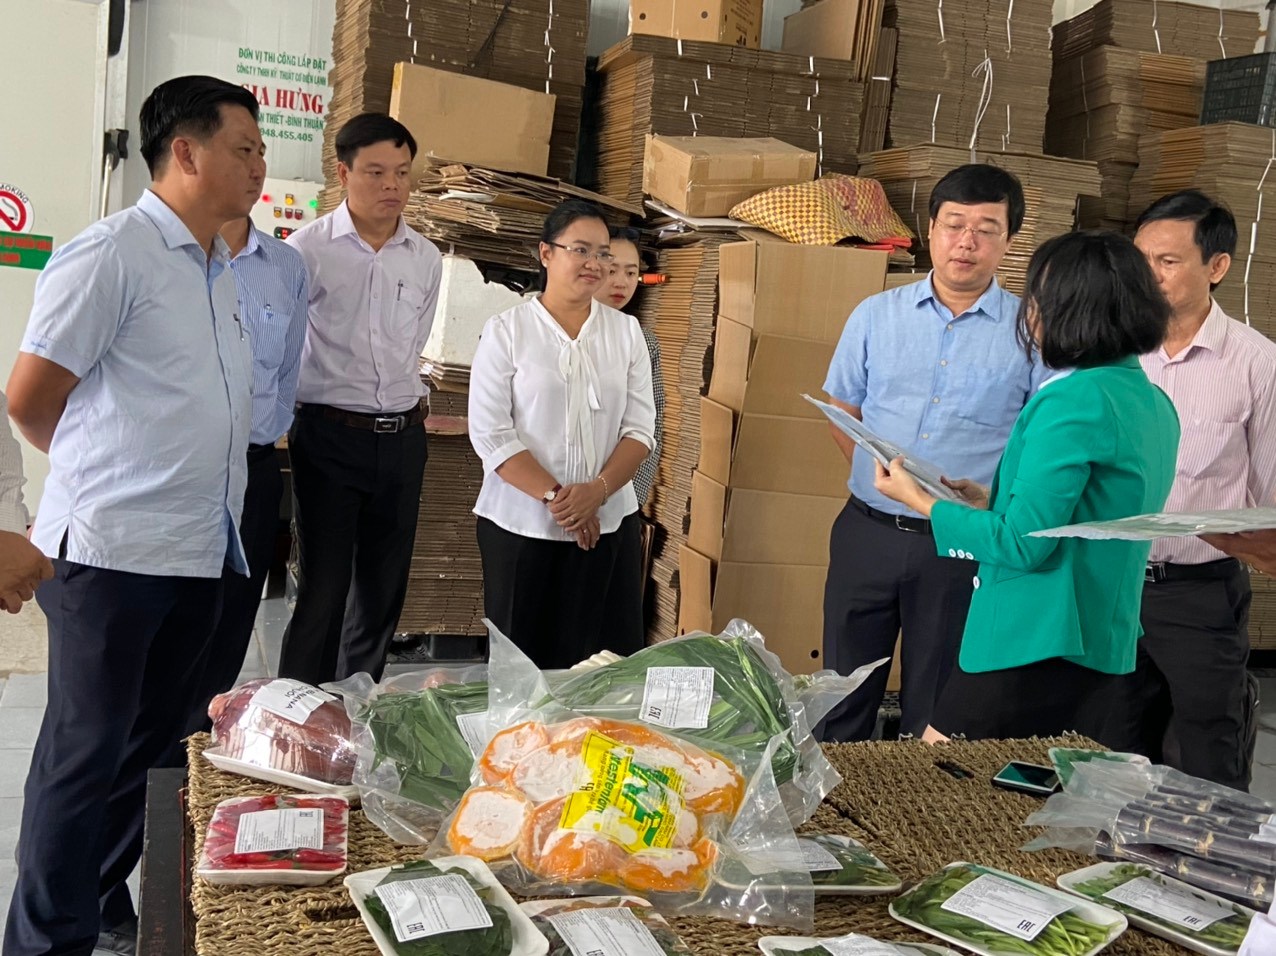 WESTERN FARM WELCOMED THE DELEGATION OF DONG THAP PROVINCIAL PEOPLE'S COMMITTEE, SHARED ABOUT THE SITUATION OF AGRICULTURAL EXPORTS AMID THE COVID-19 PANDEMIC